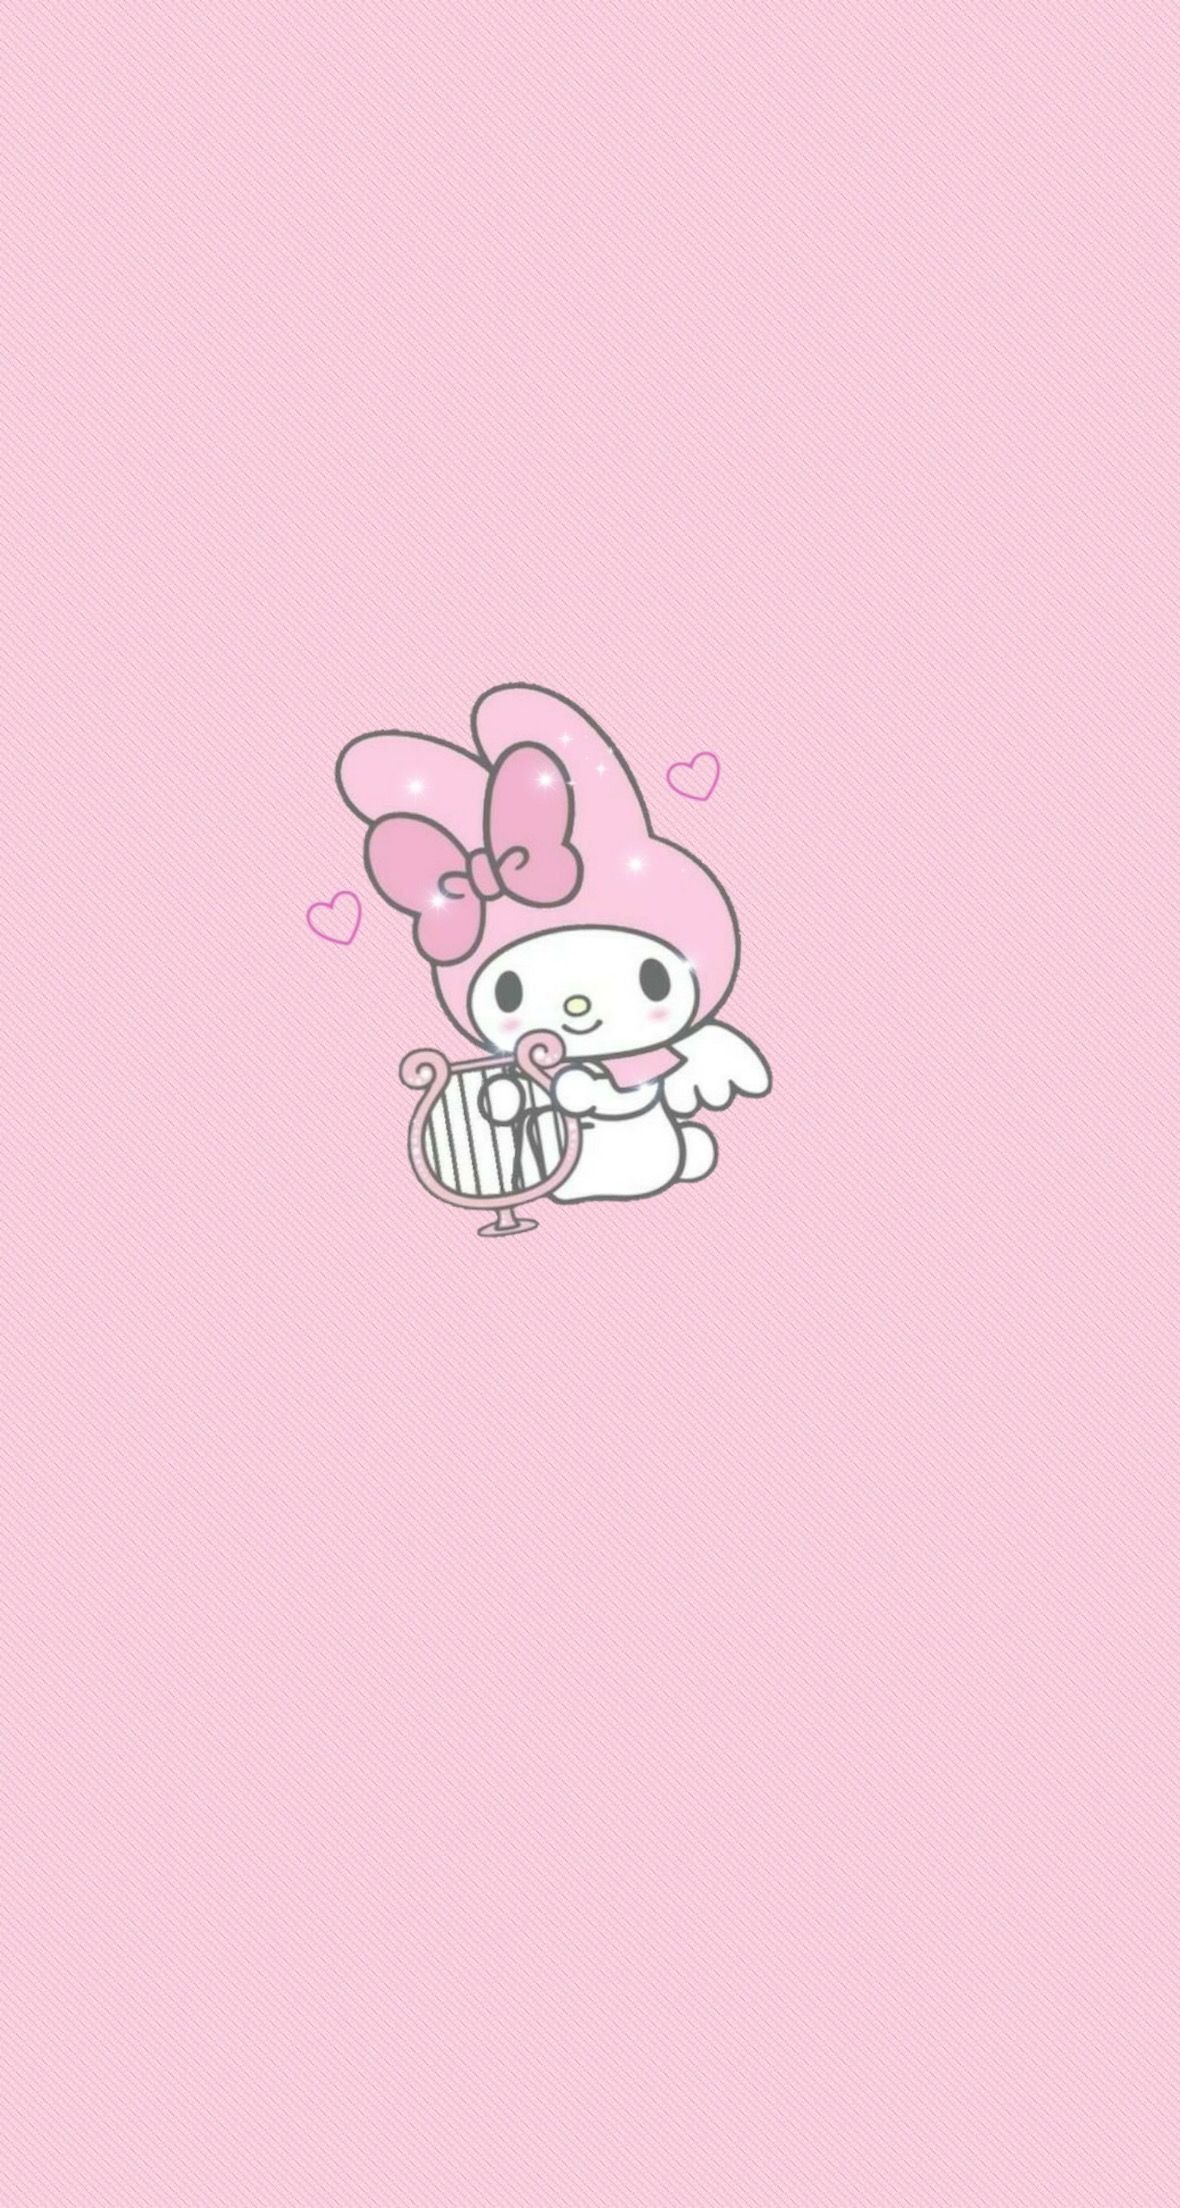 My Melody wallpaper for phone and desktop computer - My Melody, pink